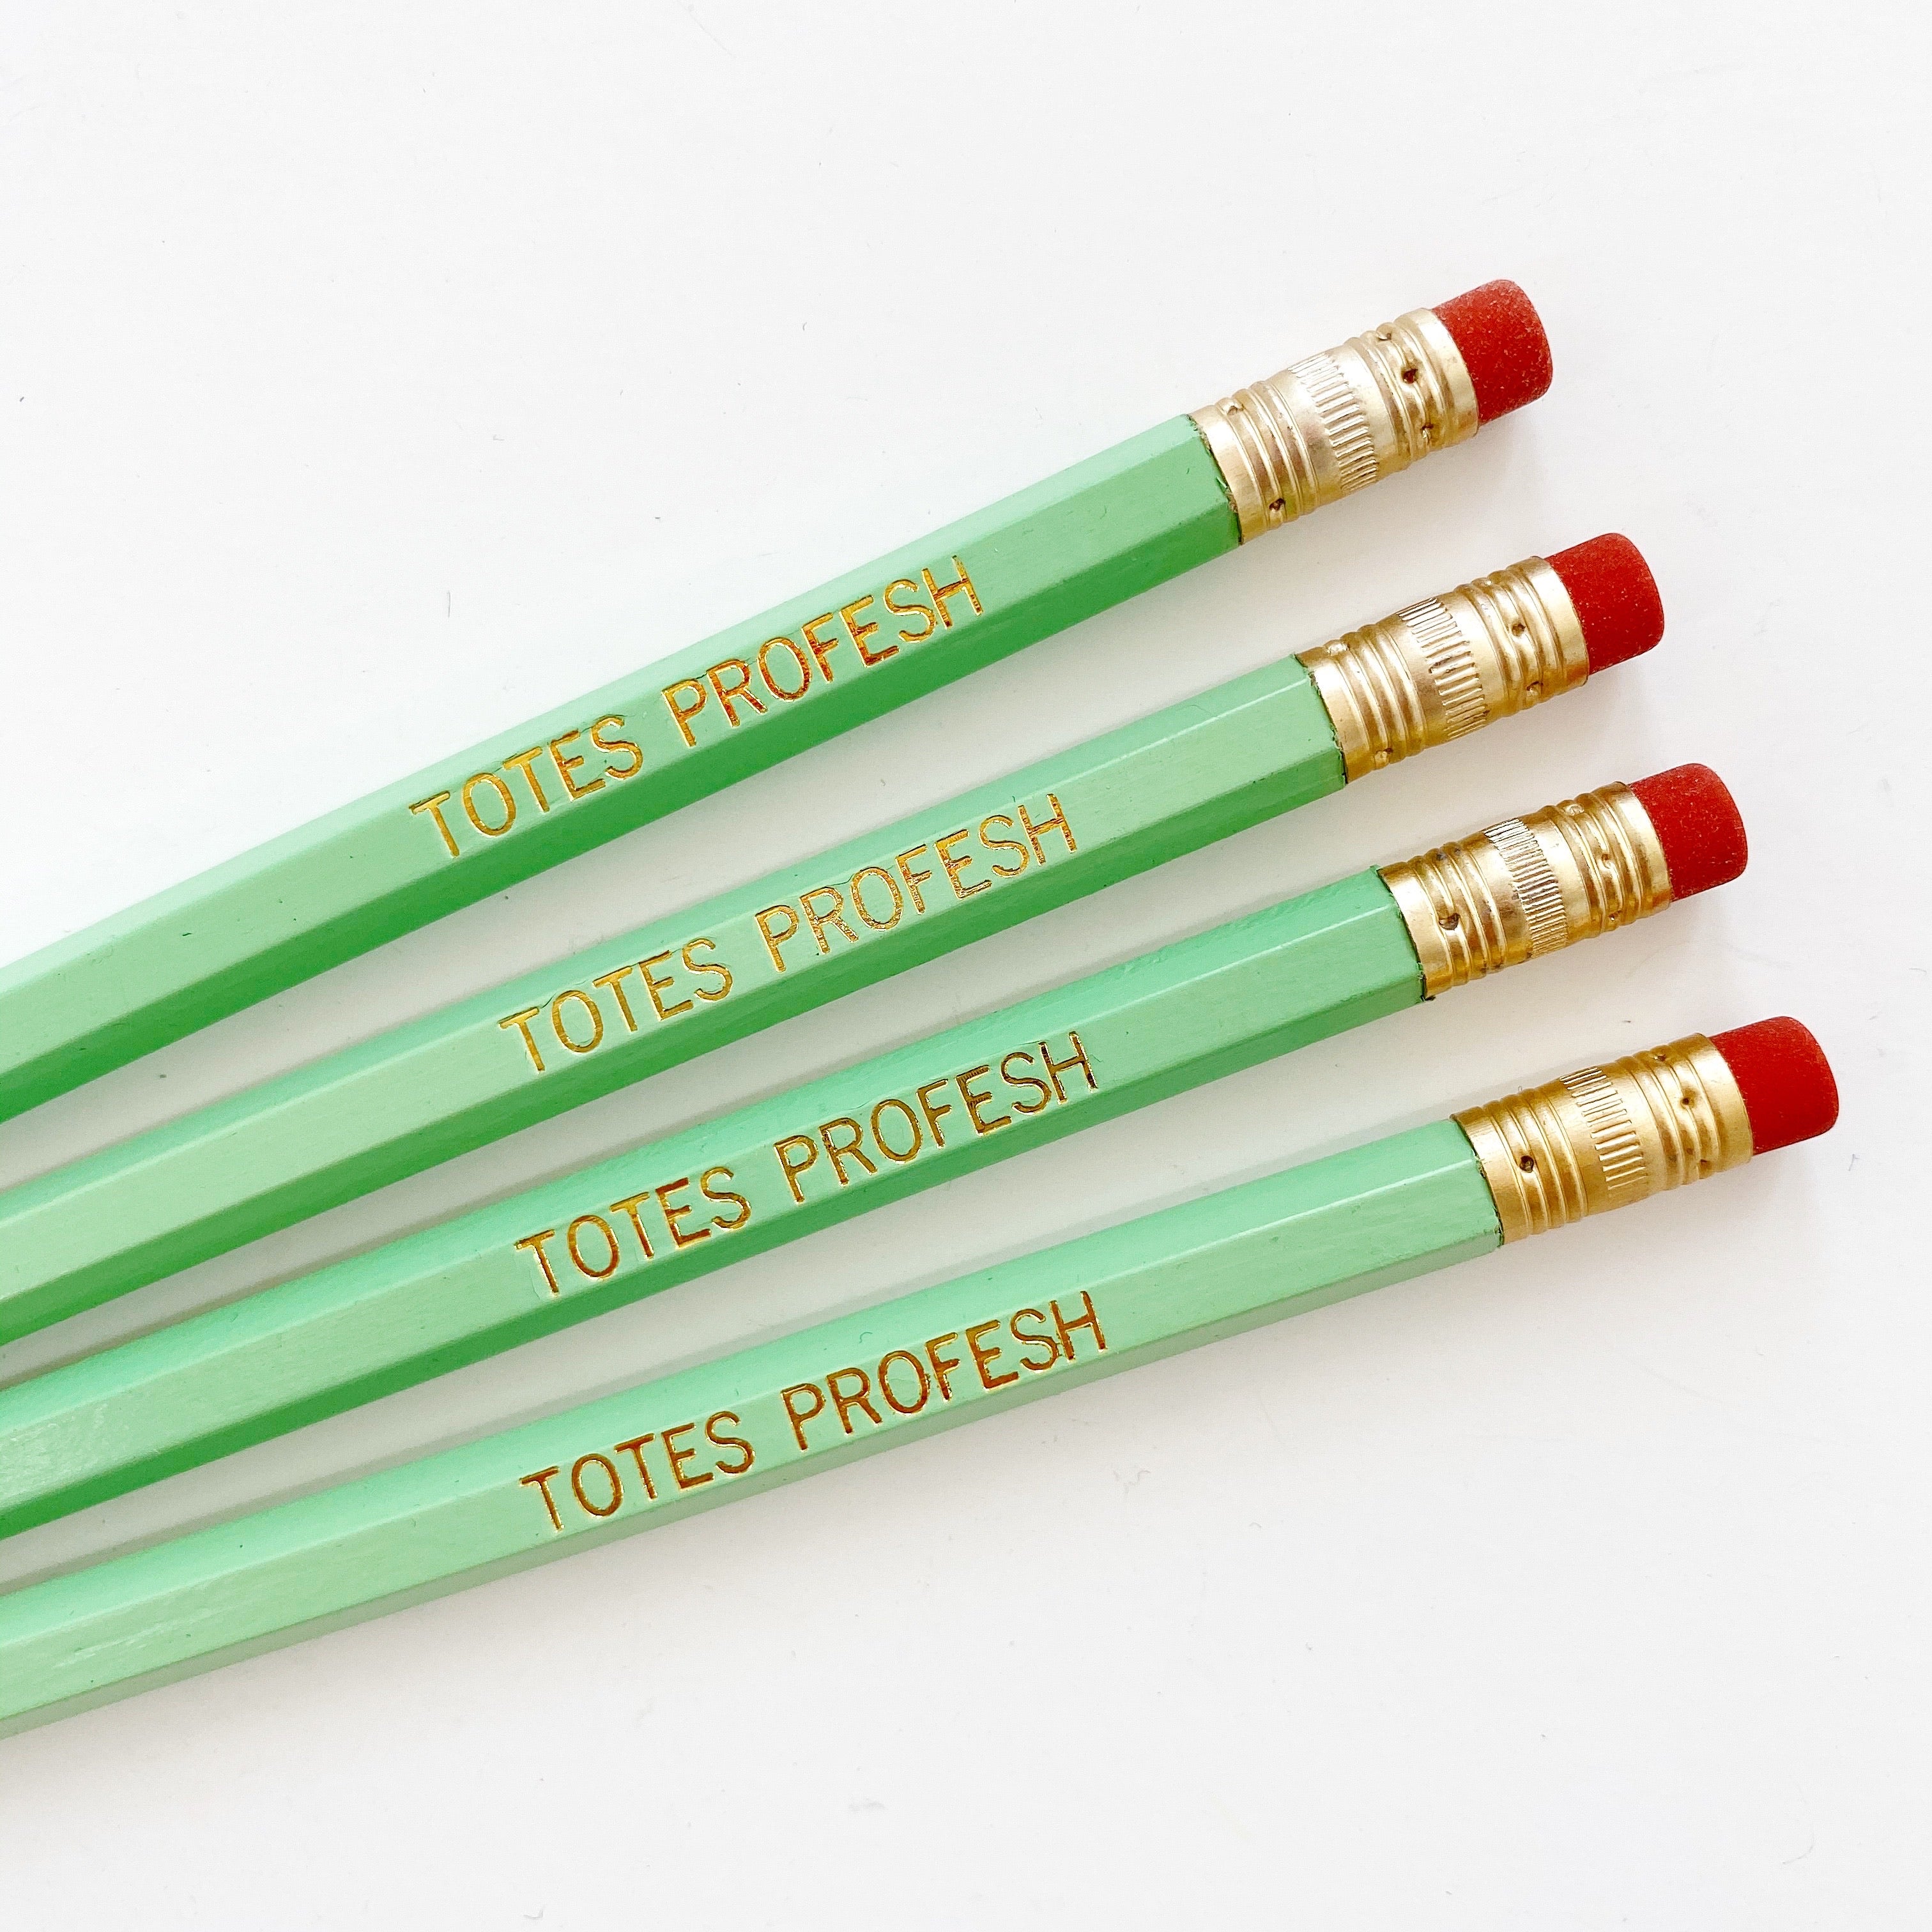 Image of green pencils with gold foil text says, "Totes profesh". 